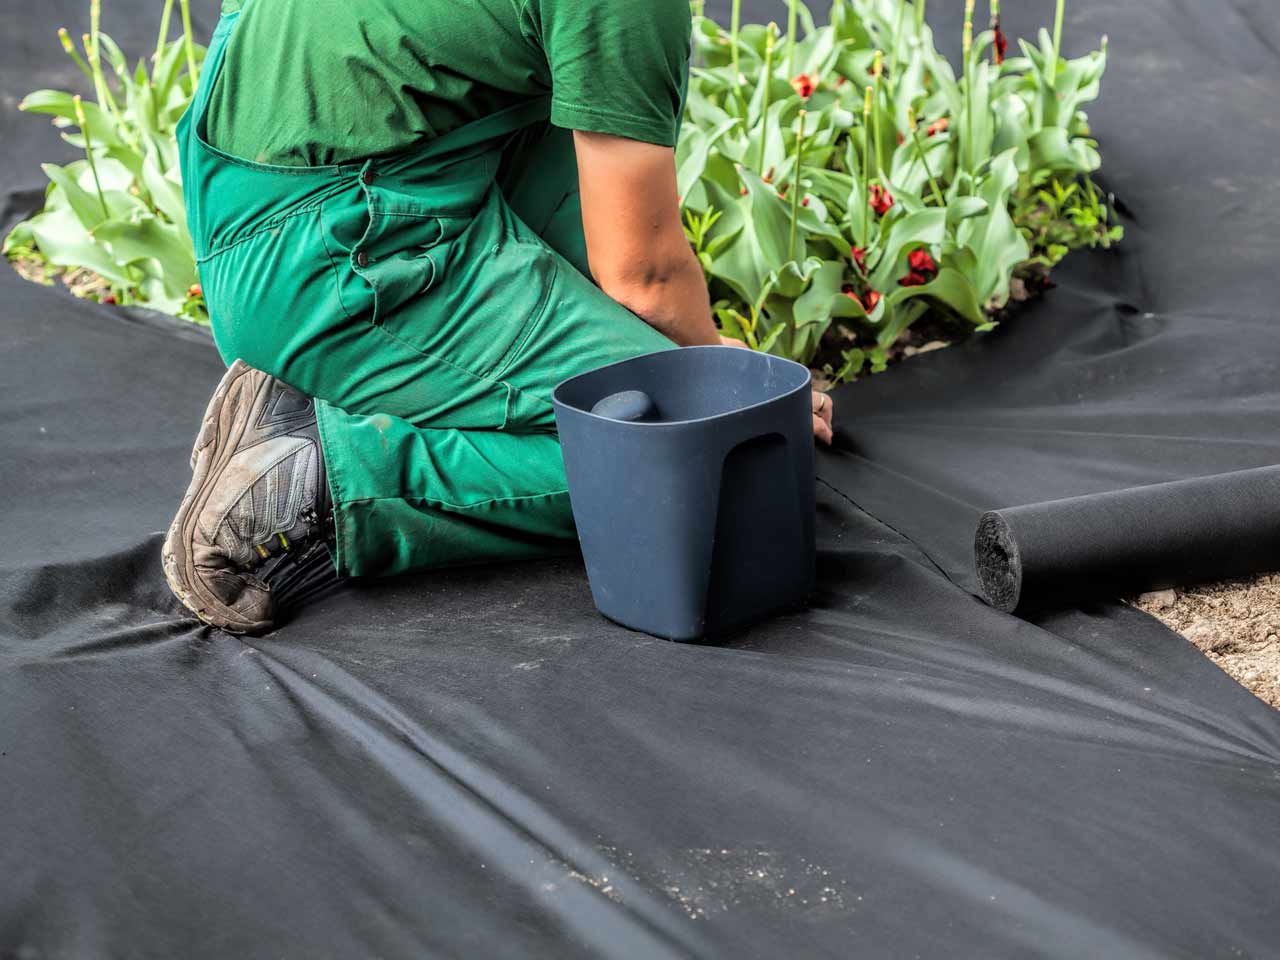 Using plastic sheeting for weed control